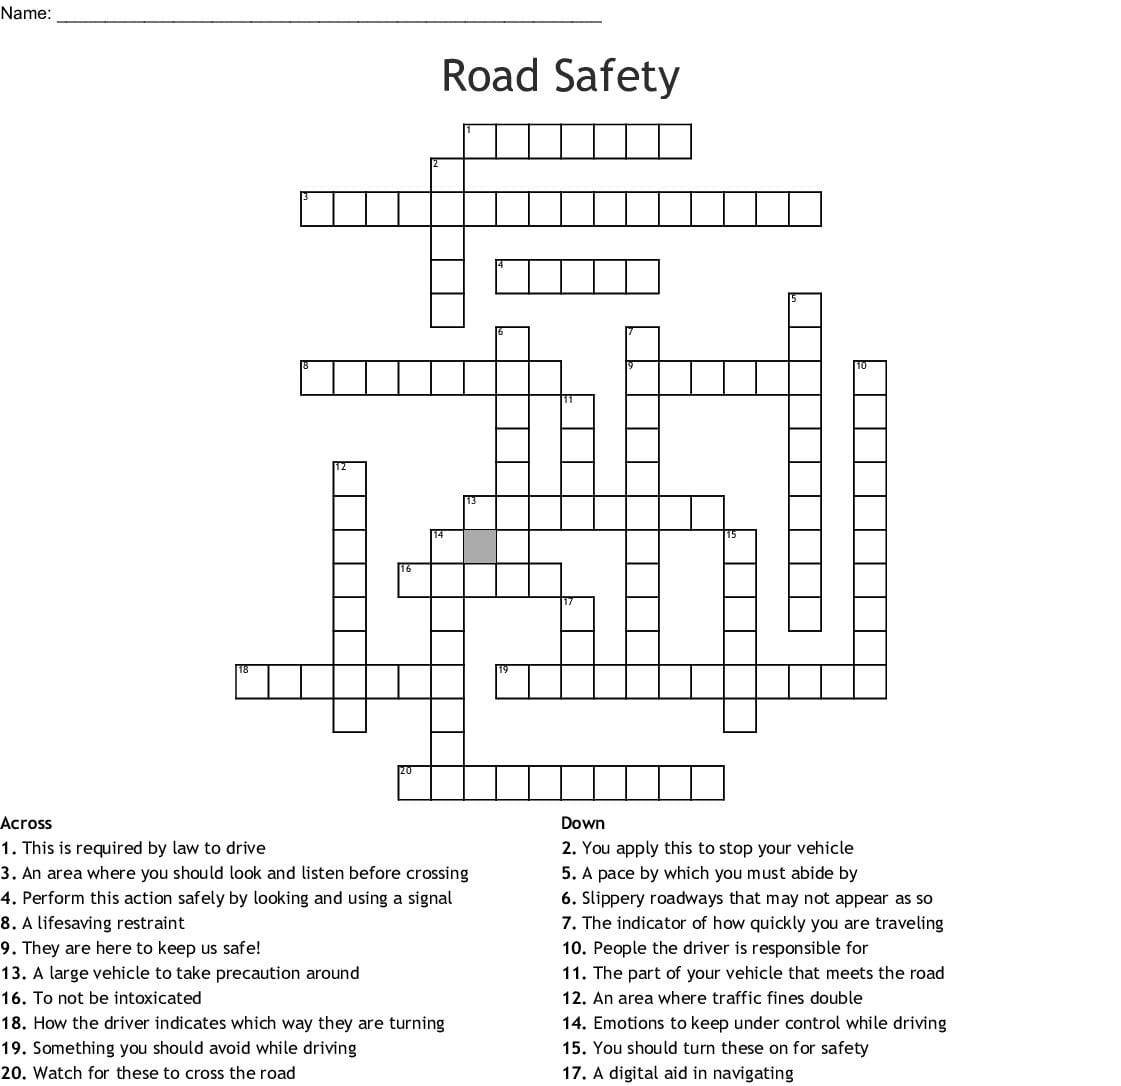 Chapter 2 Signs Signals And Roady Markings Crossword